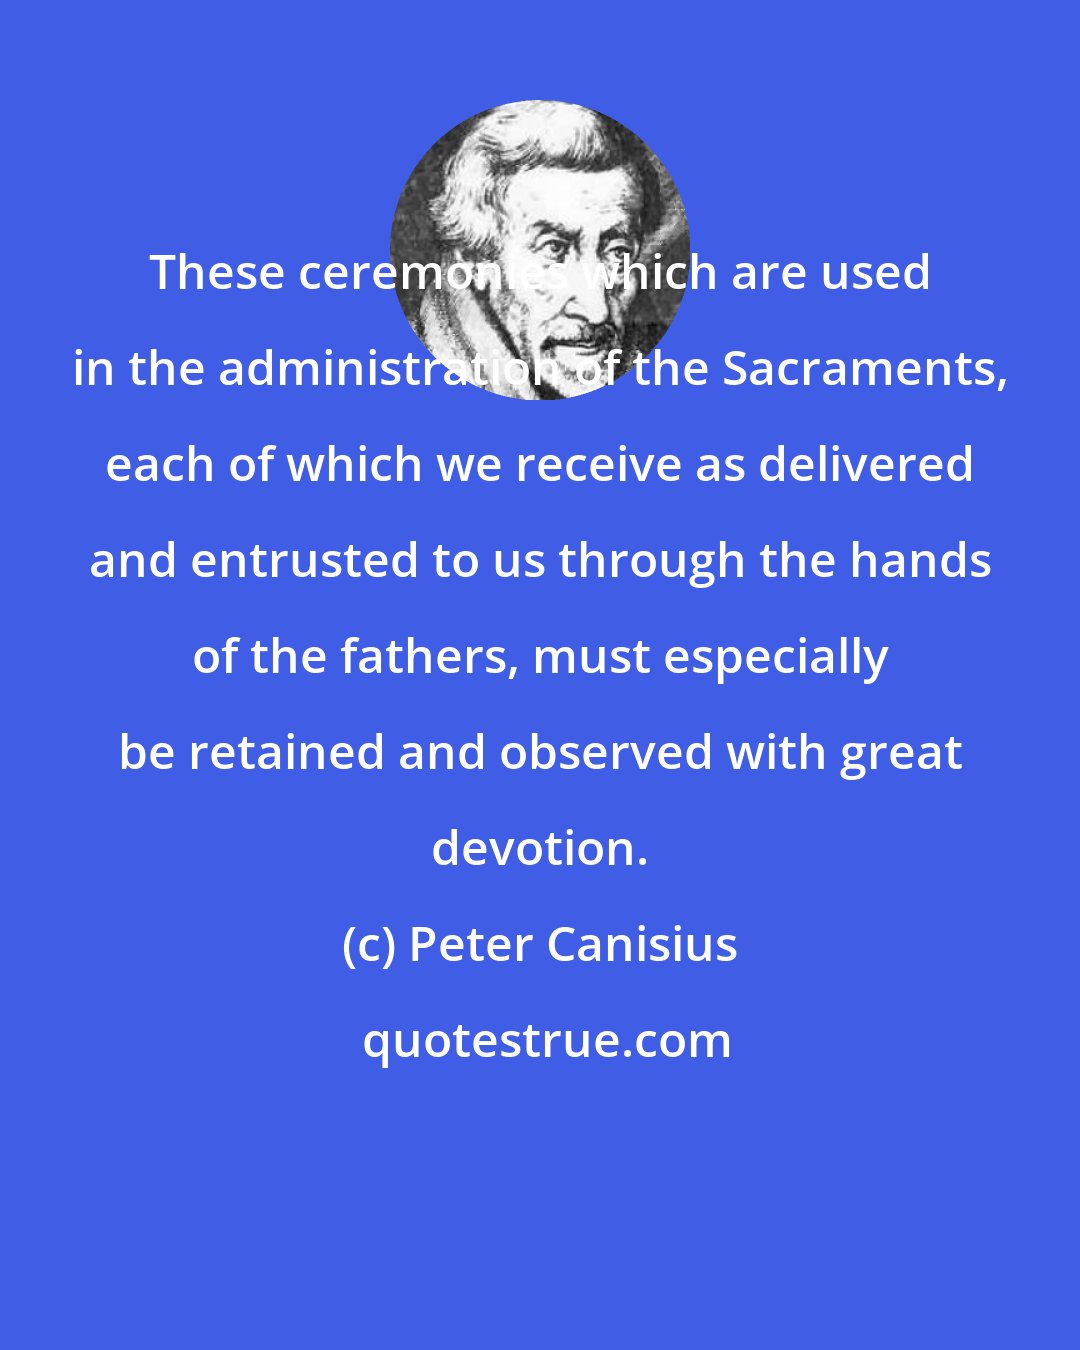 Peter Canisius: These ceremonies which are used in the administration of the Sacraments, each of which we receive as delivered and entrusted to us through the hands of the fathers, must especially be retained and observed with great devotion.